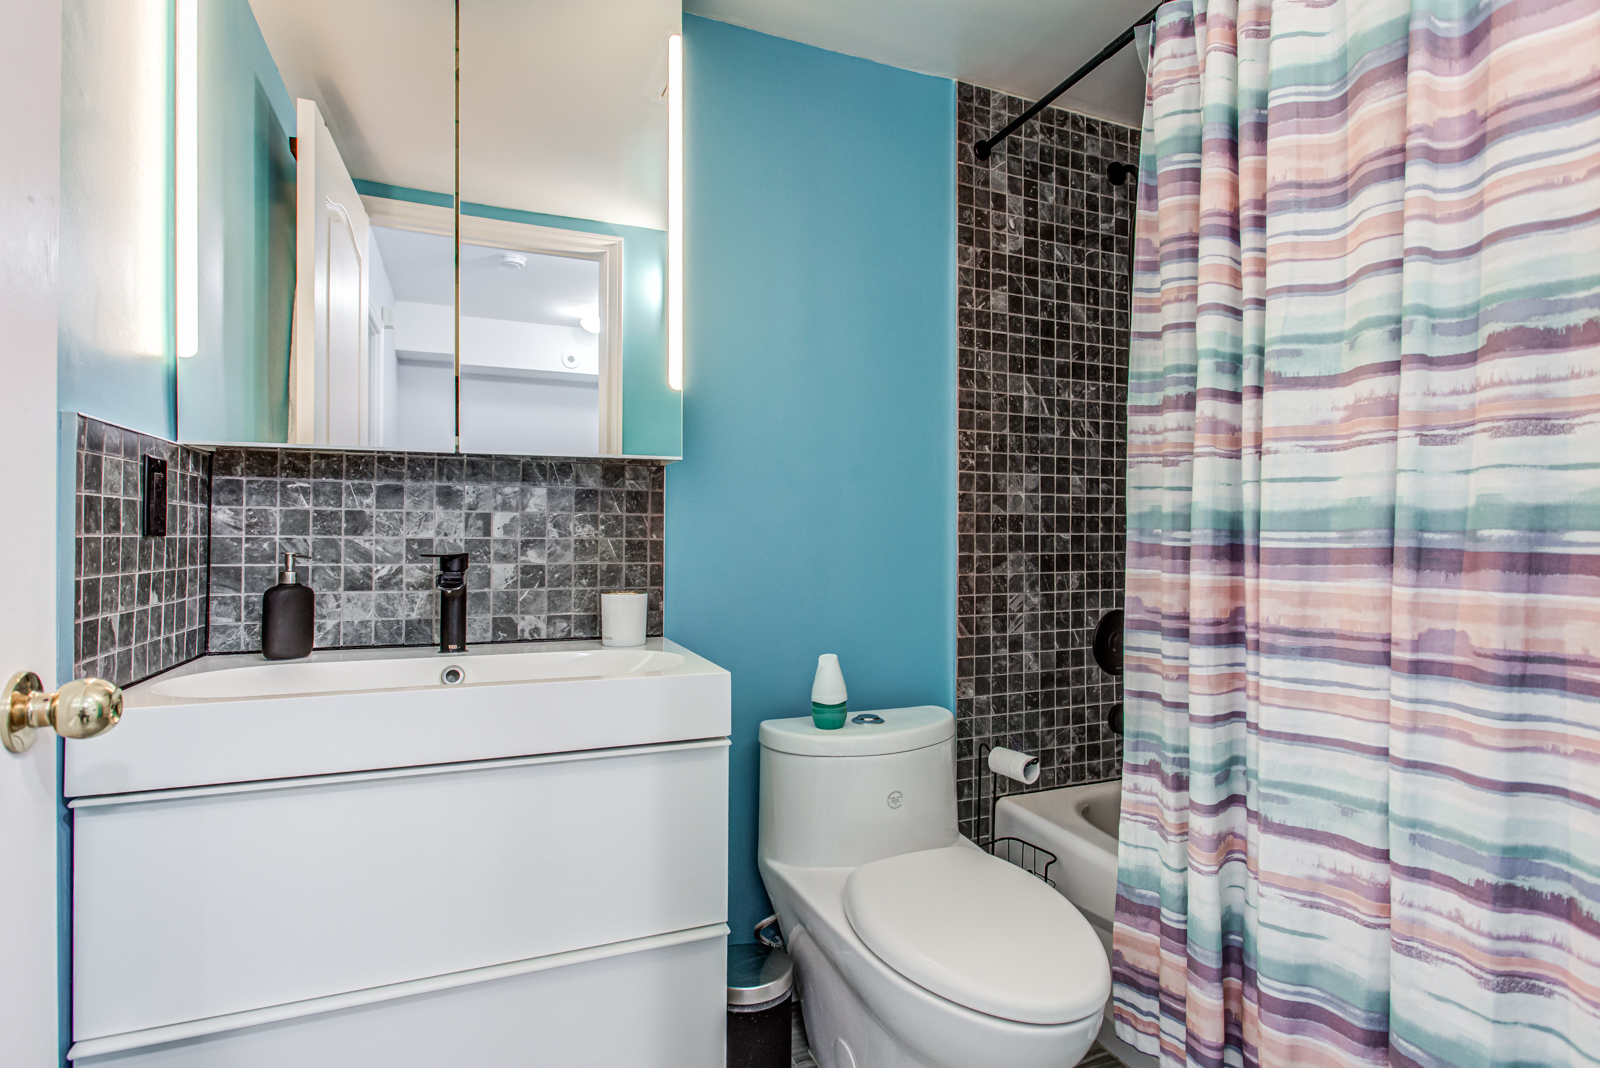 Newly-renovated bathroom with bright blue walls, small black tiles, colourful curtains and black faucet.